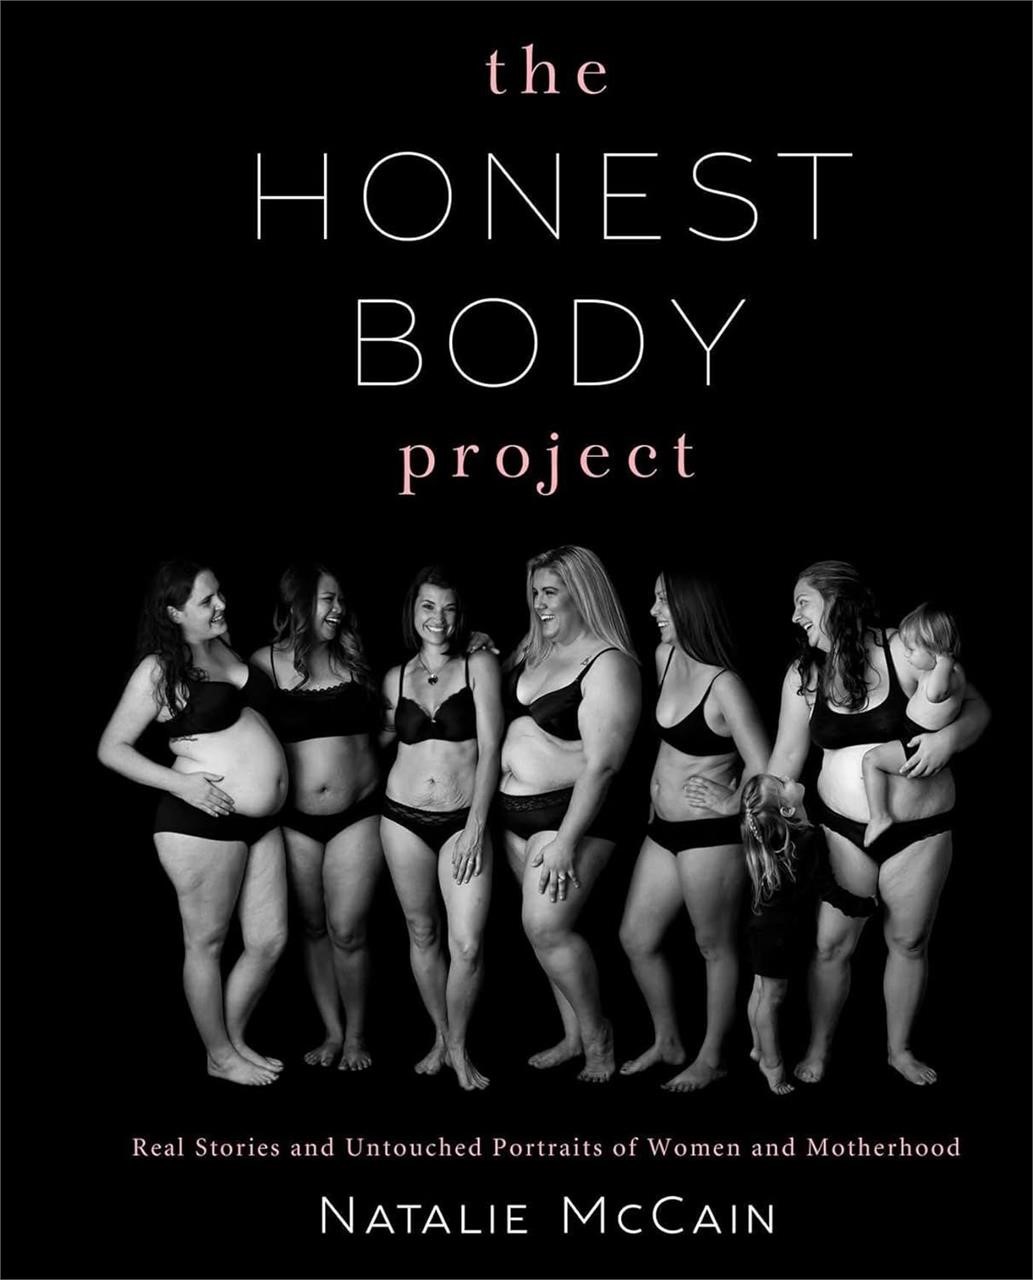 Book: "The Honest Body Project" by Natalie McCain